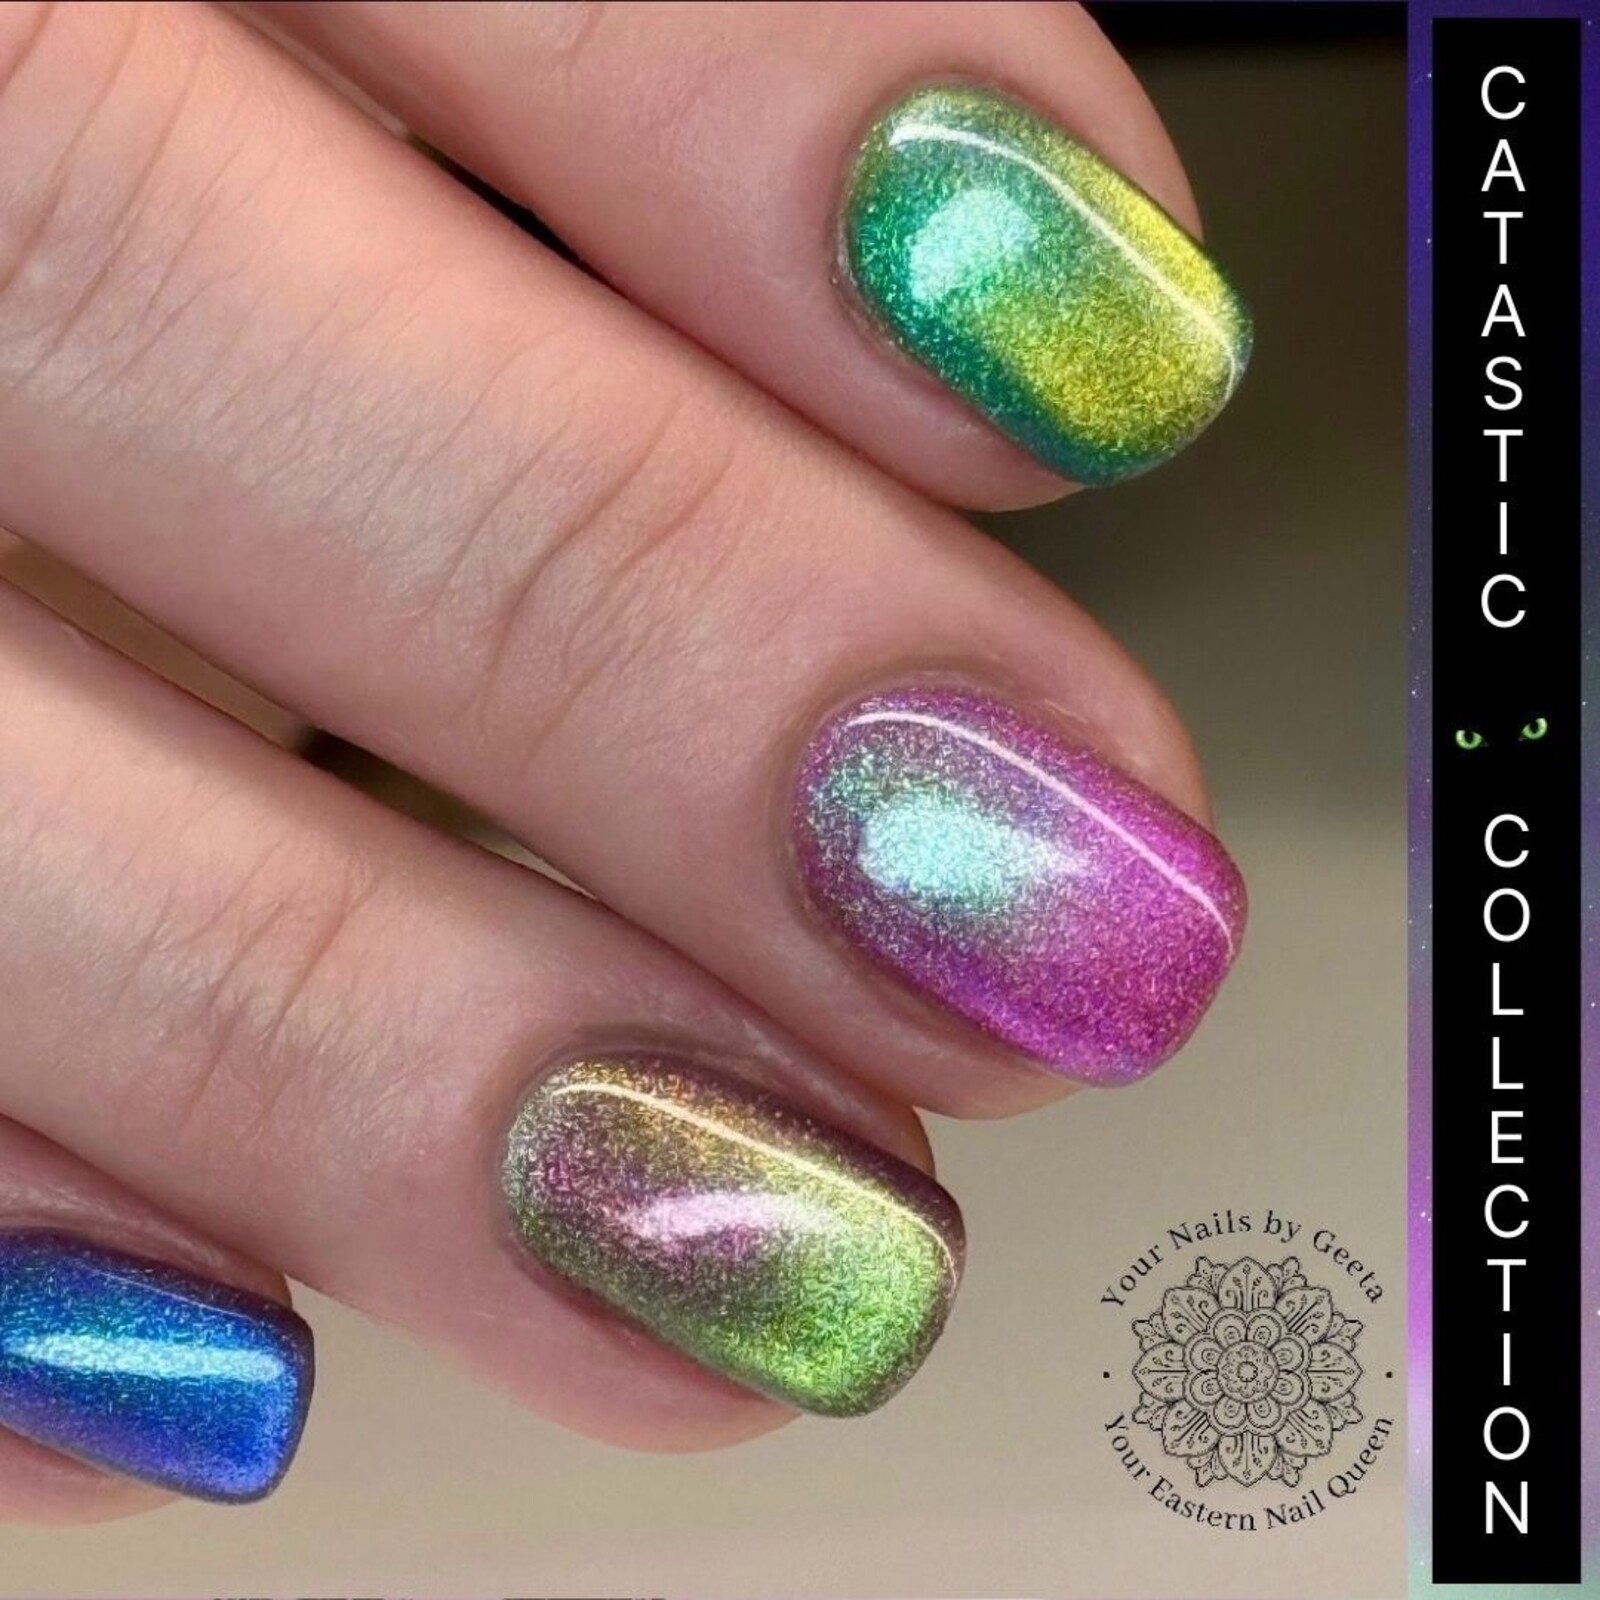 Urban nails Catastic Cat eye Collection